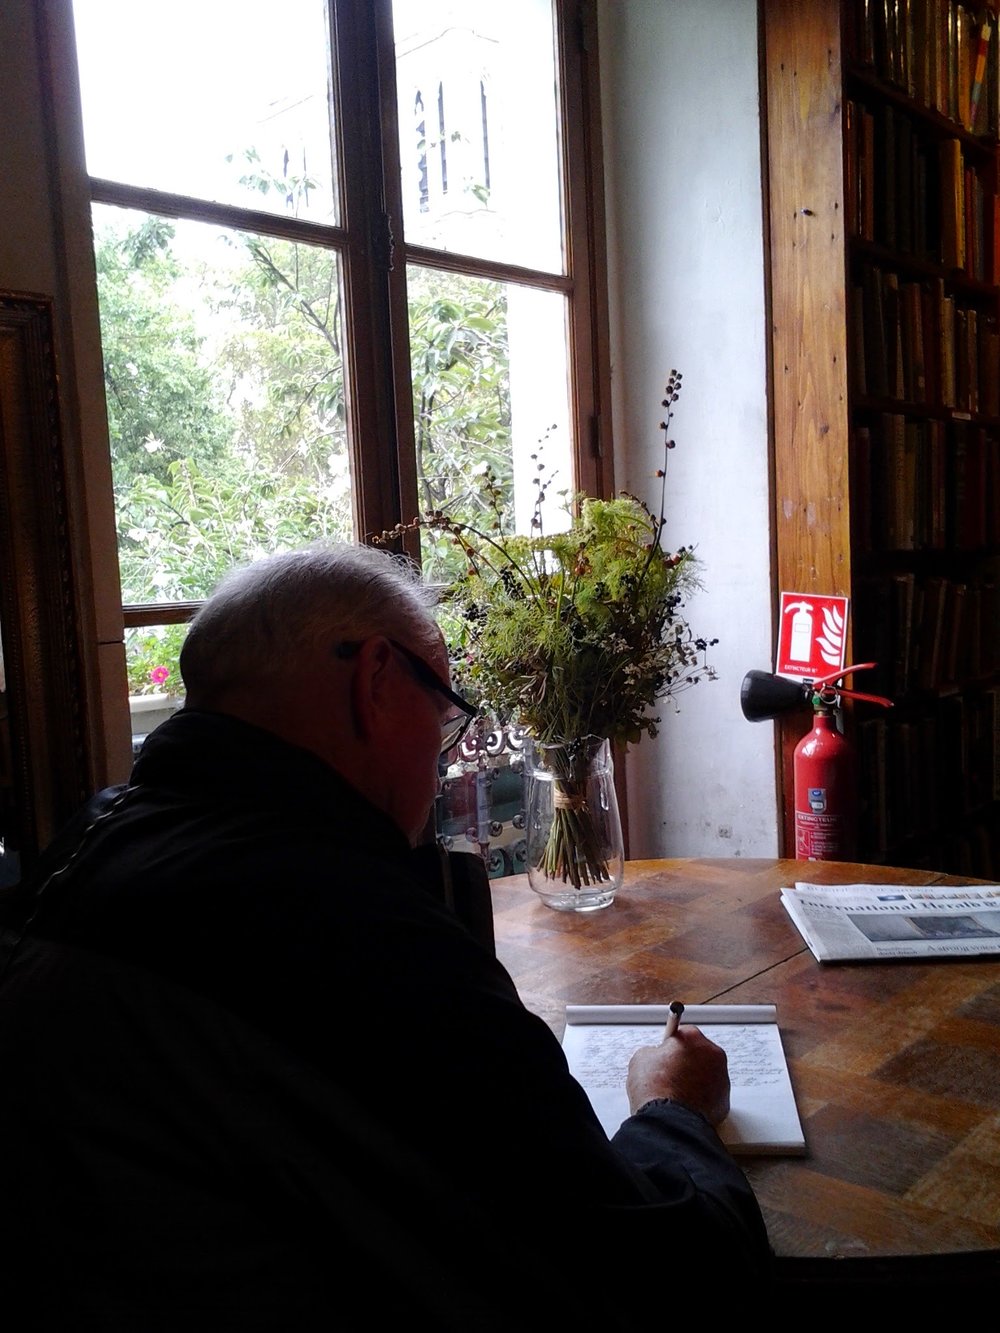 ...and the romance of the obscure writer laboring away in a Parisian garret...